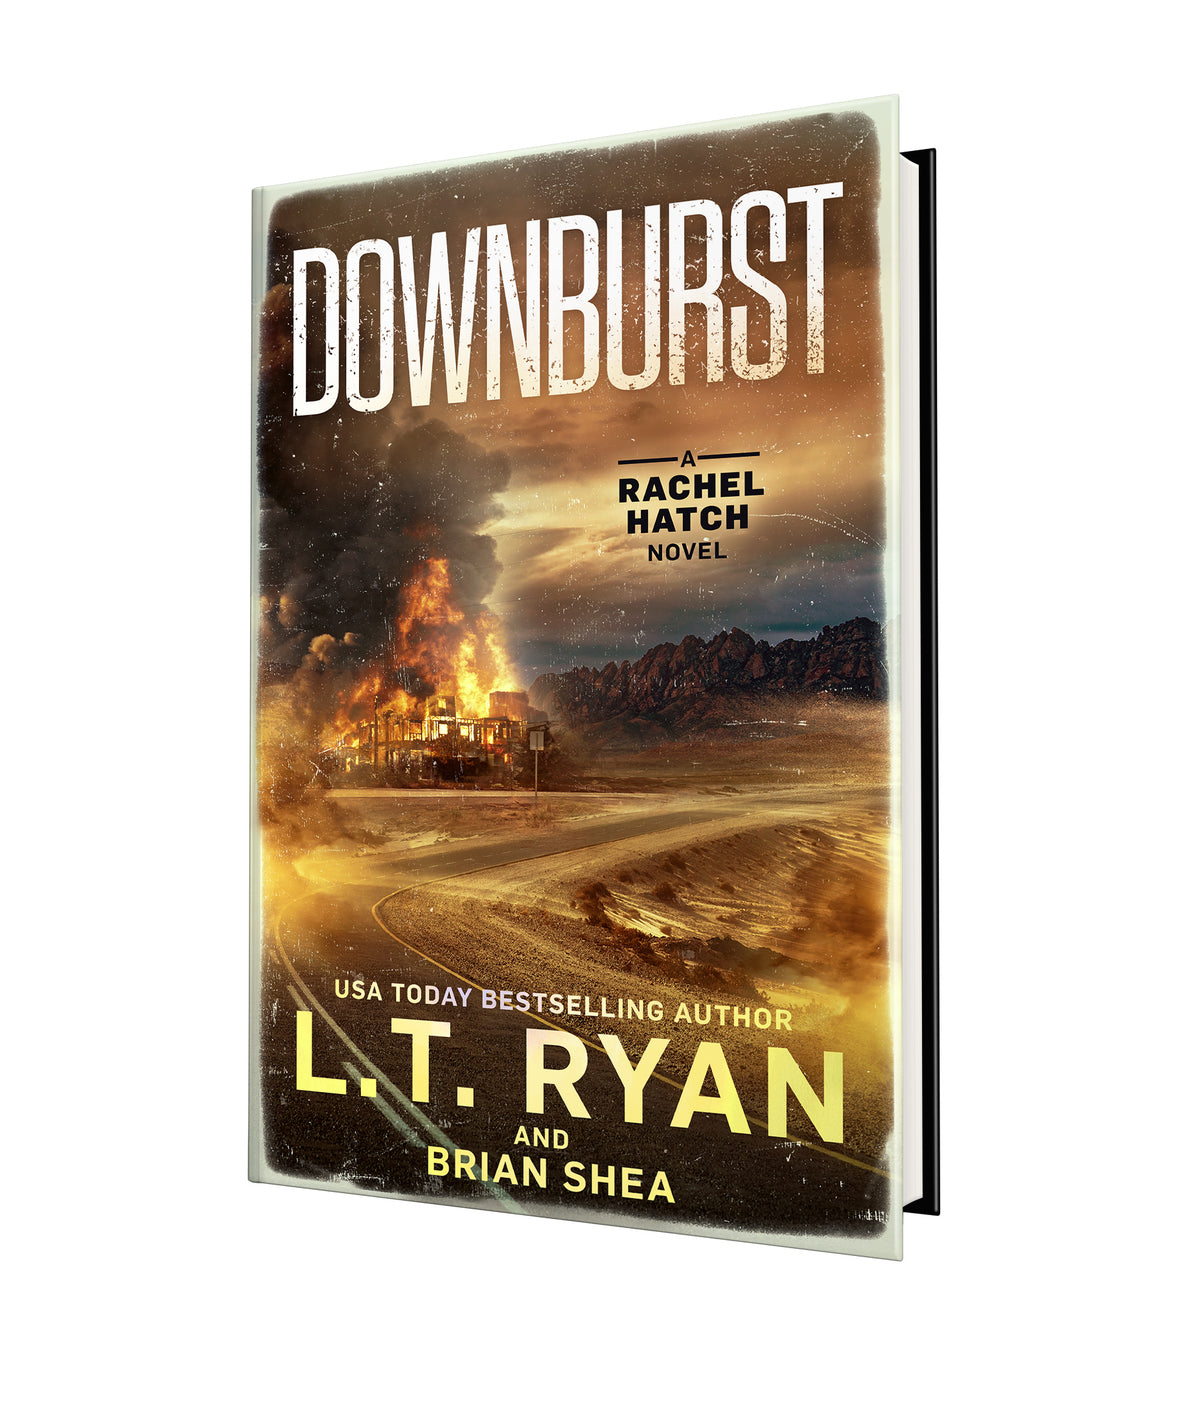 Downburst: Signed by the Author